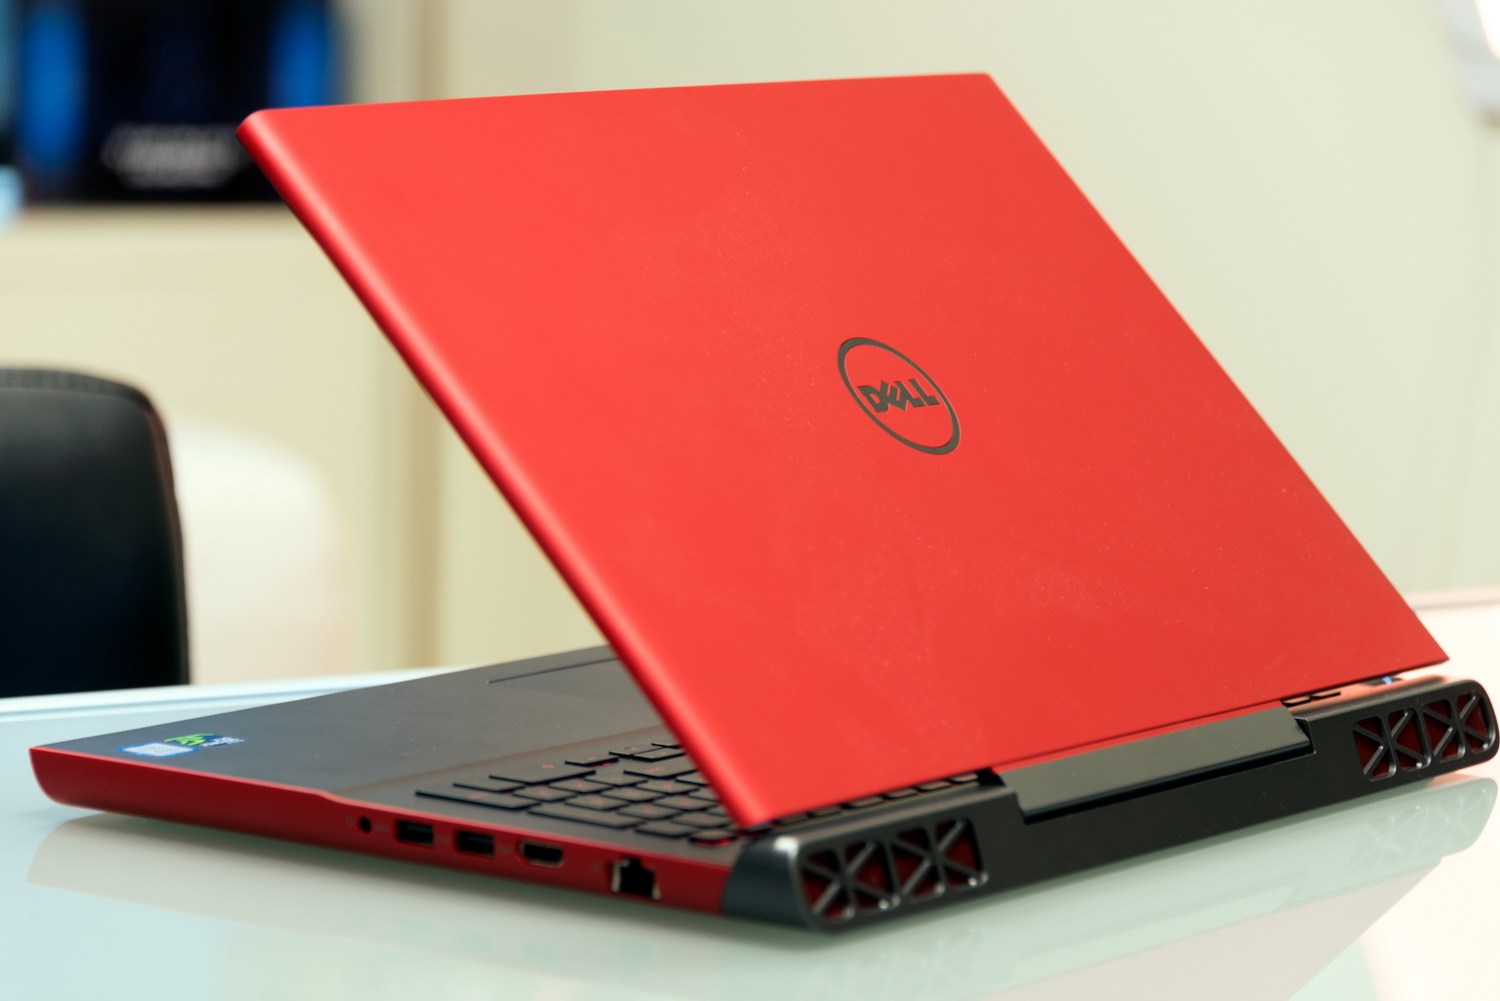 Dell Inspiron 15 Gaming Budget Gaming Laptop Review | Digital Trends